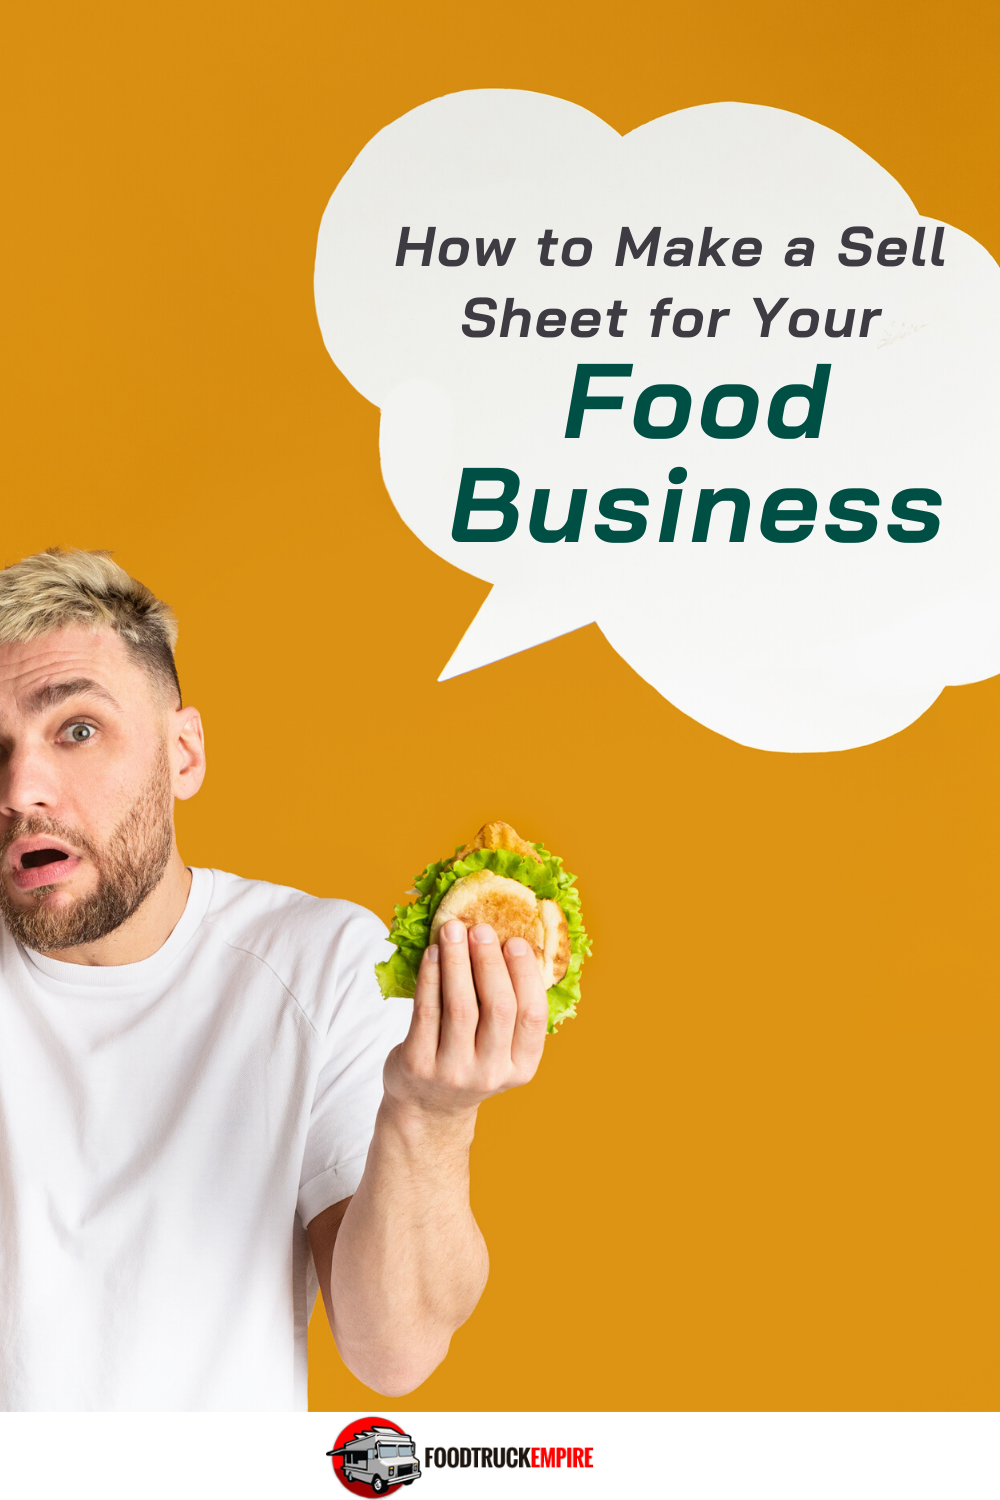 How to make a sell sheet for your food business